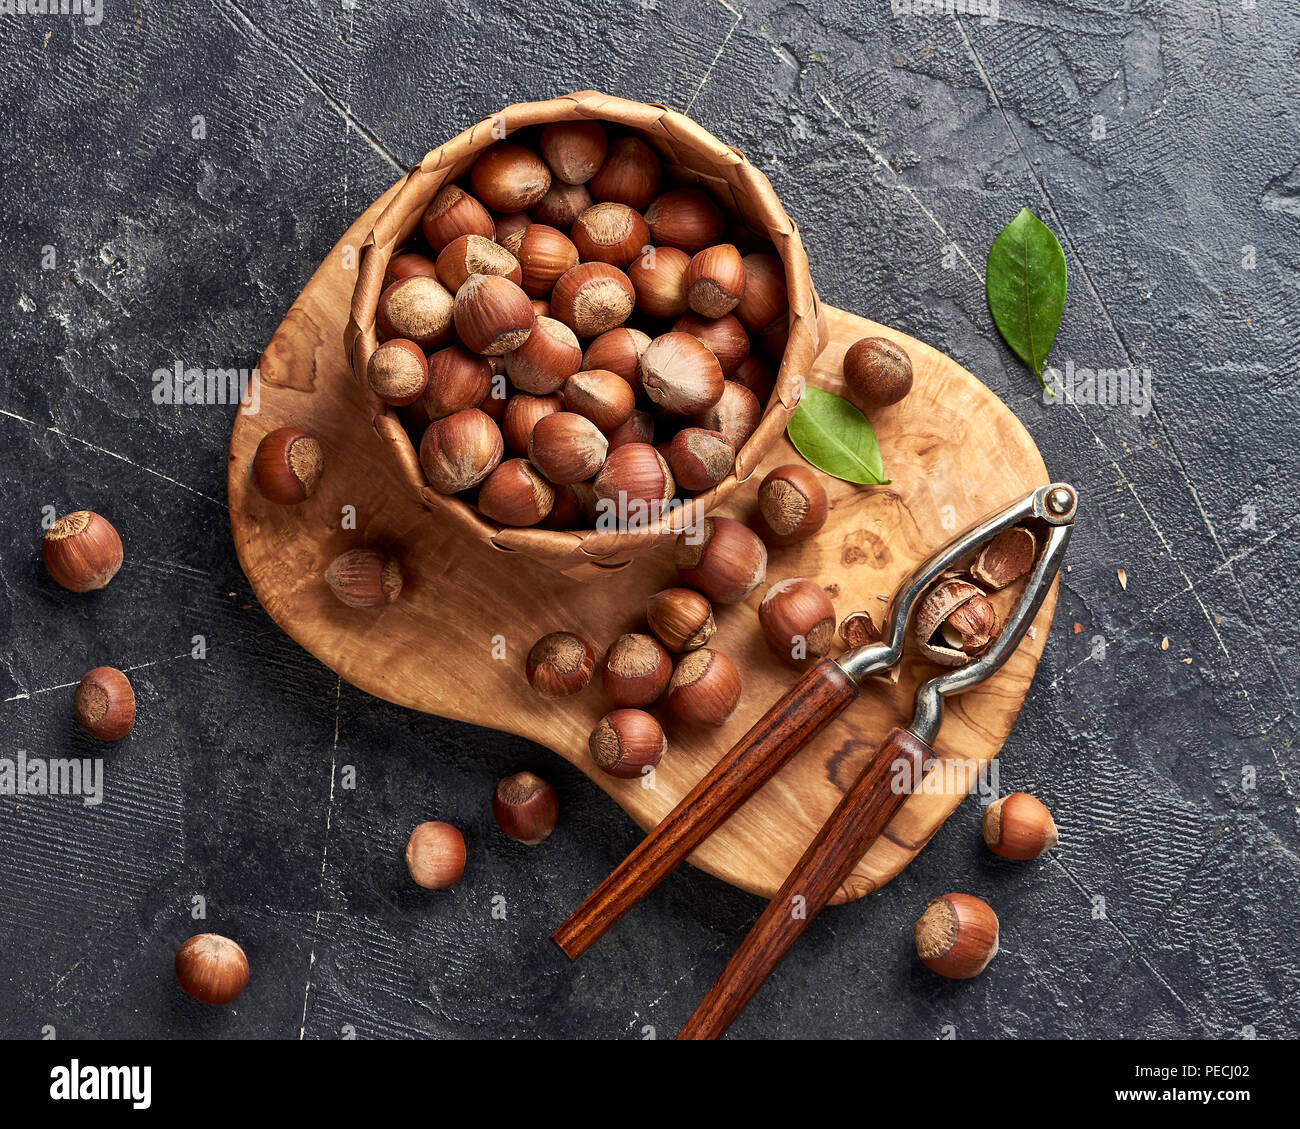 Hazelnut with nutcracker on olive wooden board. Nuts with green leaves. Top view. Stock Photo